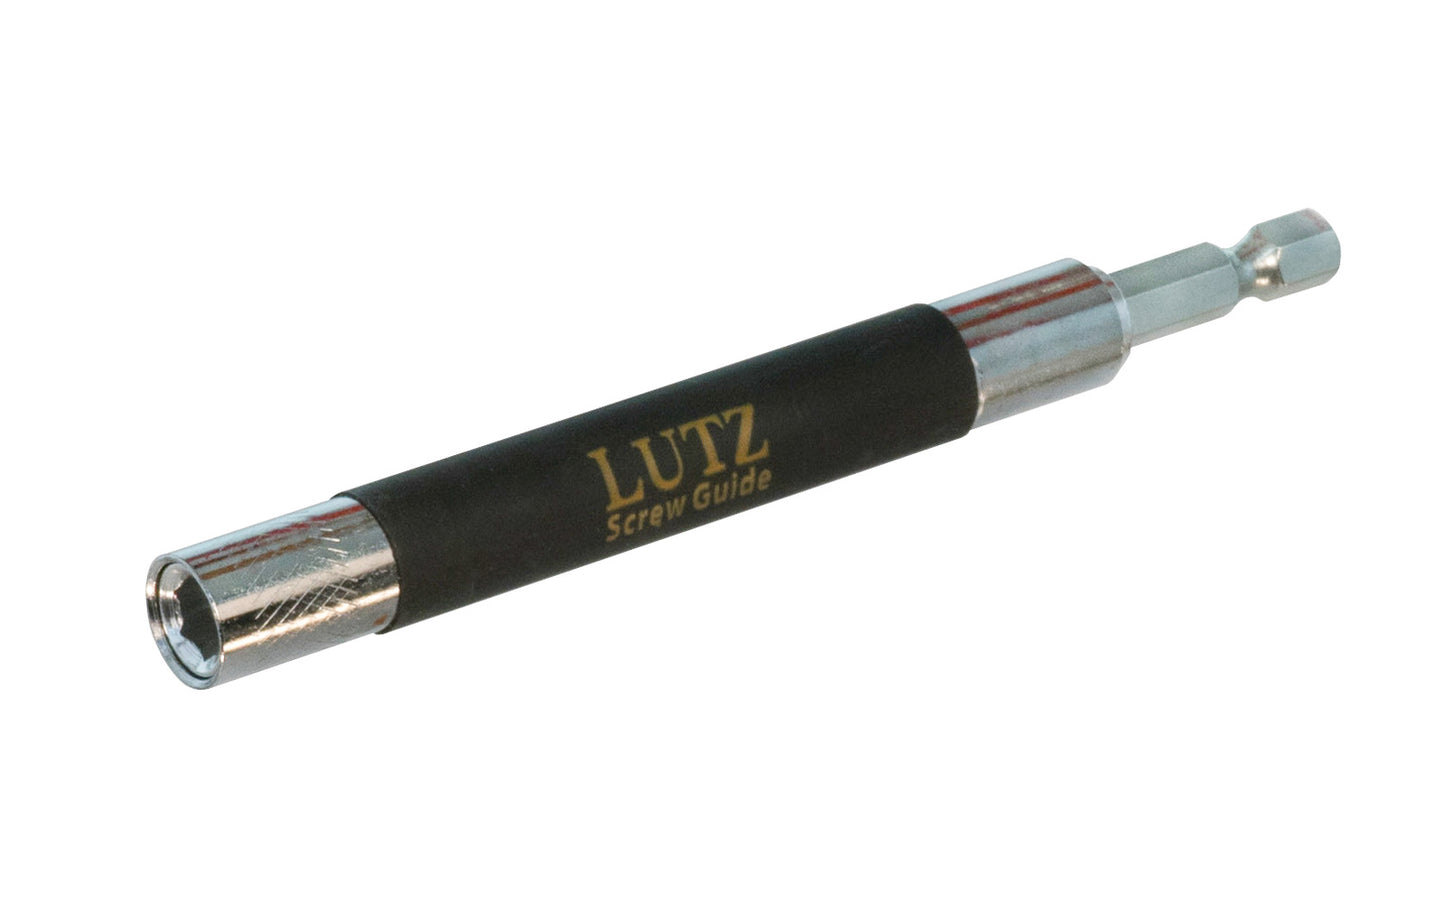 Lutz Magnetic Screw Guide. The outer sleeve slides over screwhead & helps to keep the bit in the screwhead recess. Especially usefully with slotted screws. Model No. 23056. 052427230560